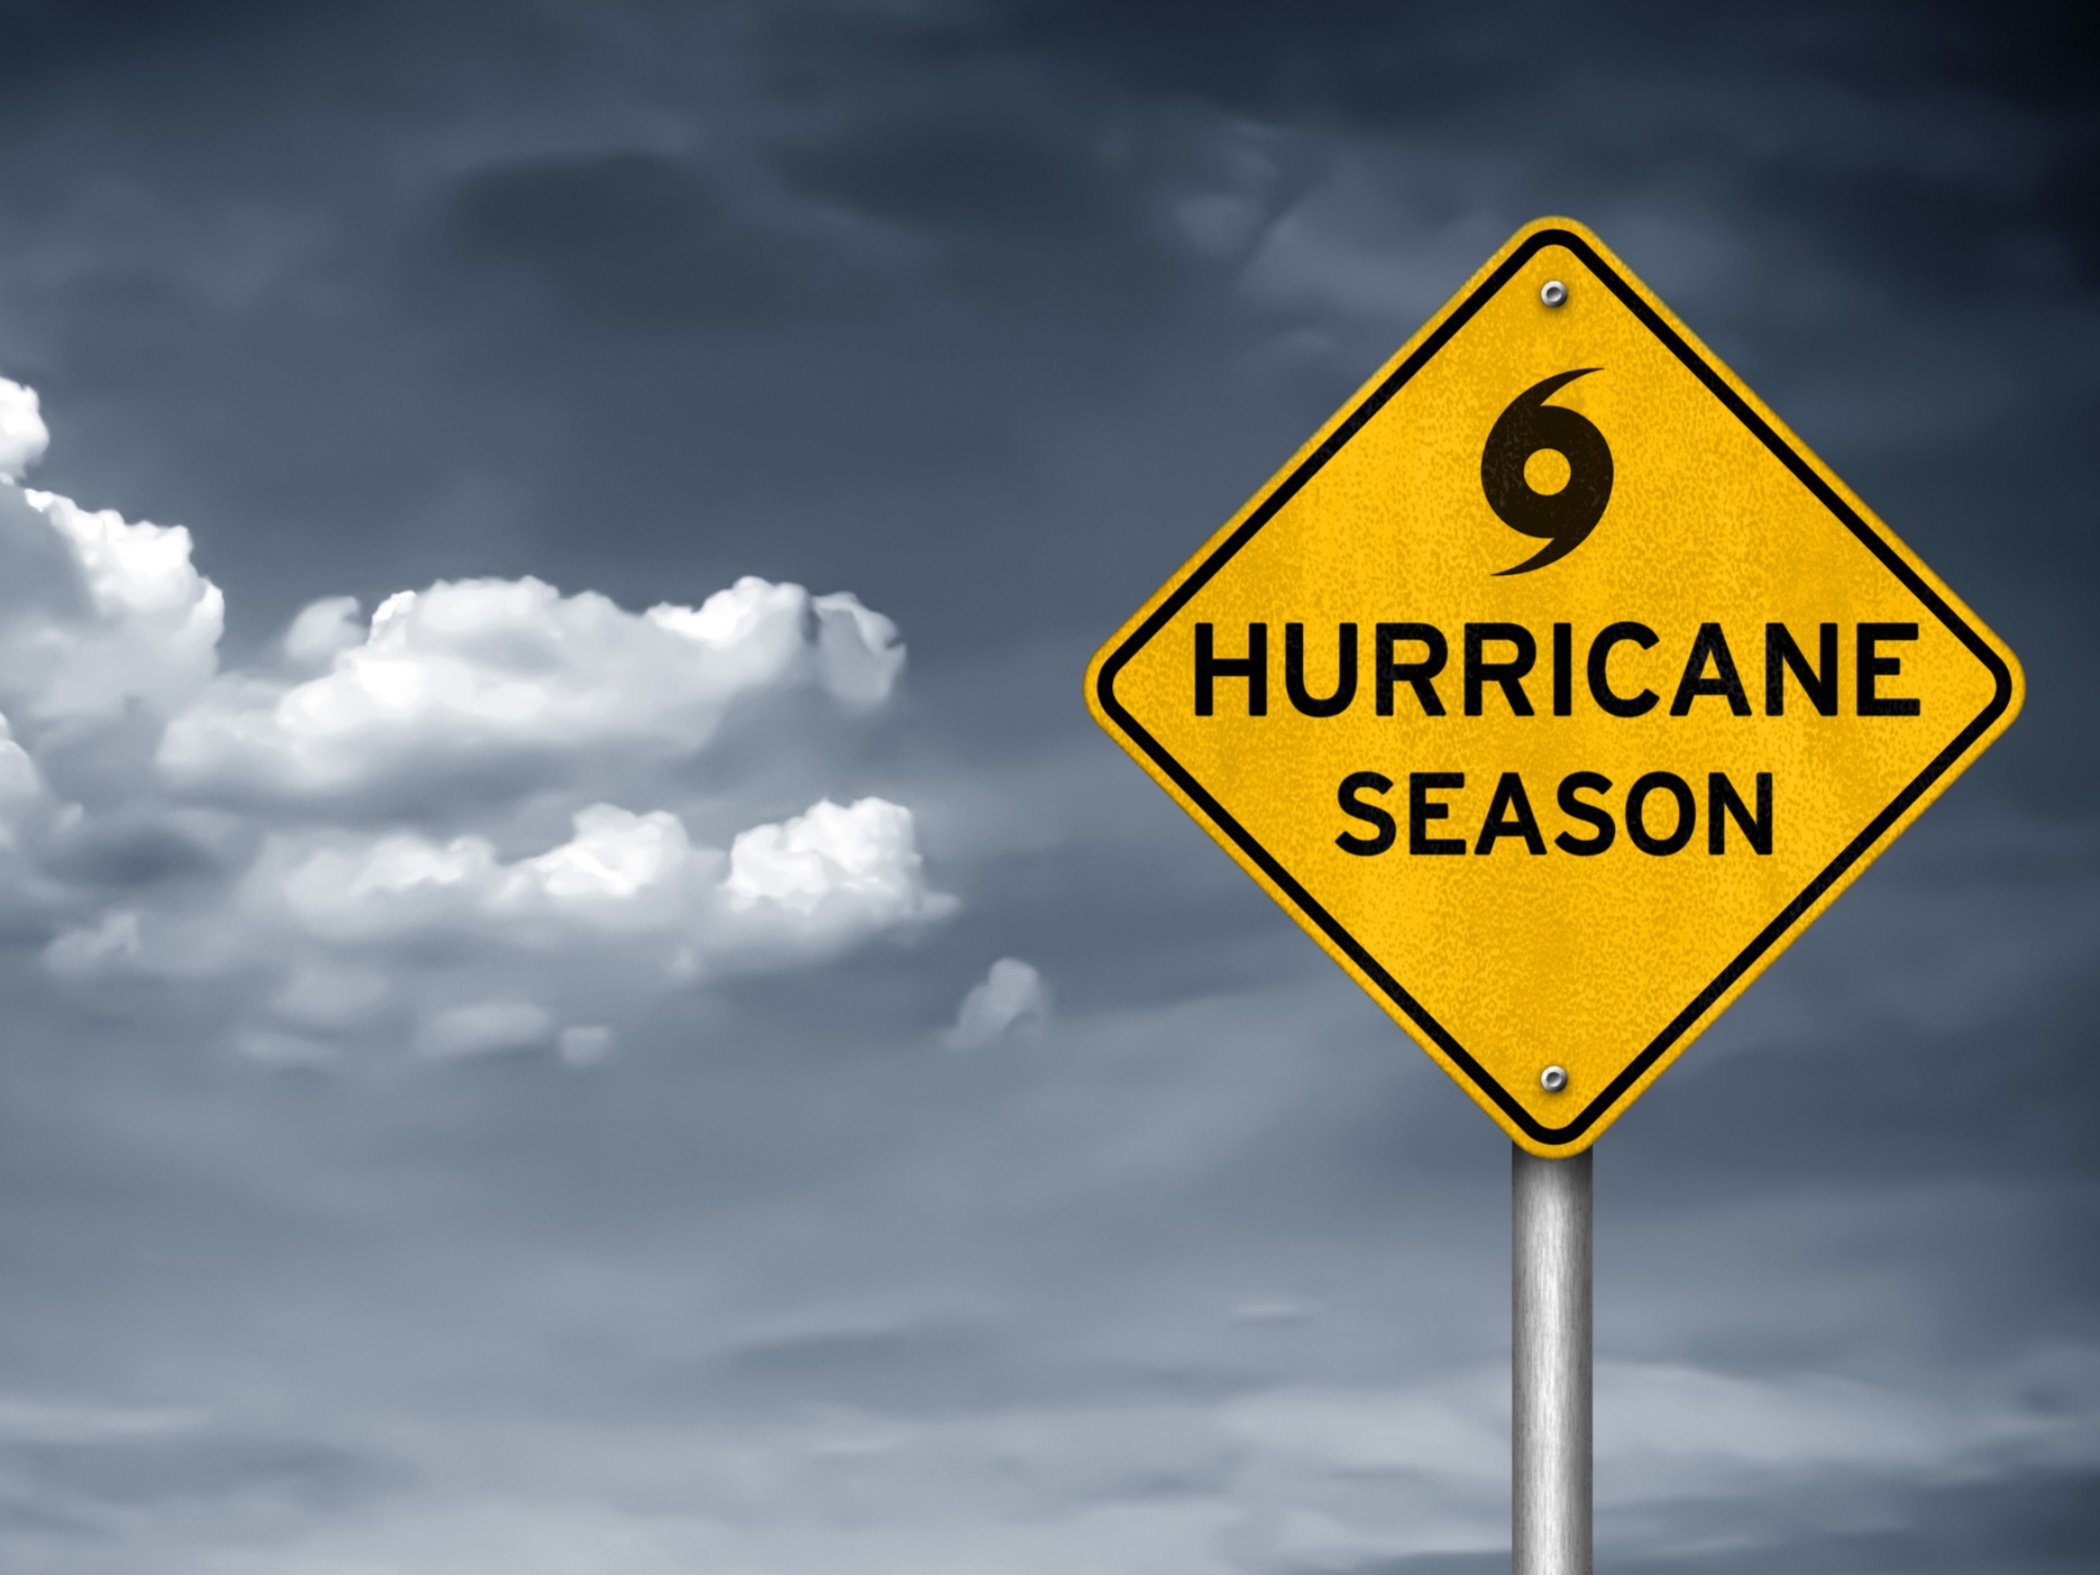 Hurricane Safety Before, During and After the Storm